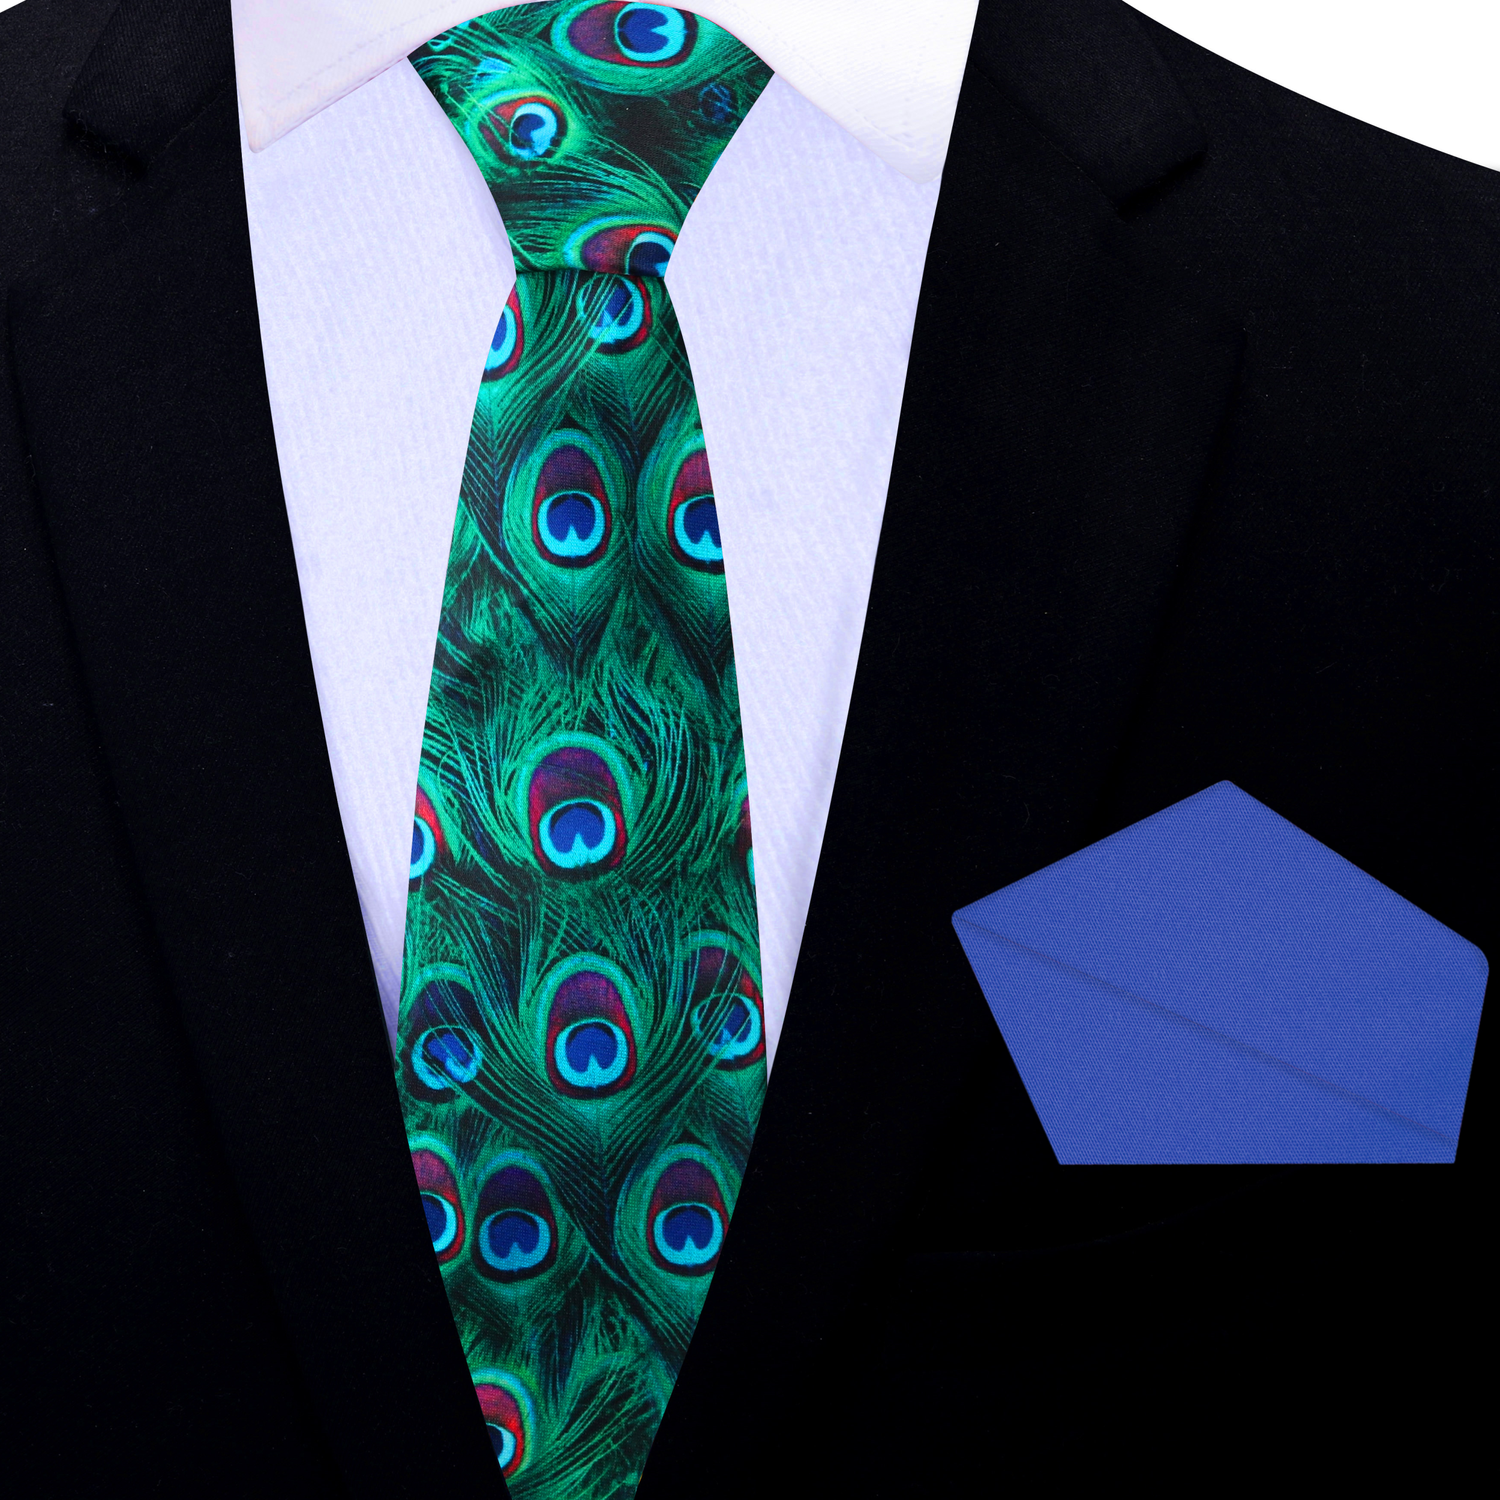 Thin Tie: Green, Blue, Red Peacock Feather Tie and Blue Square